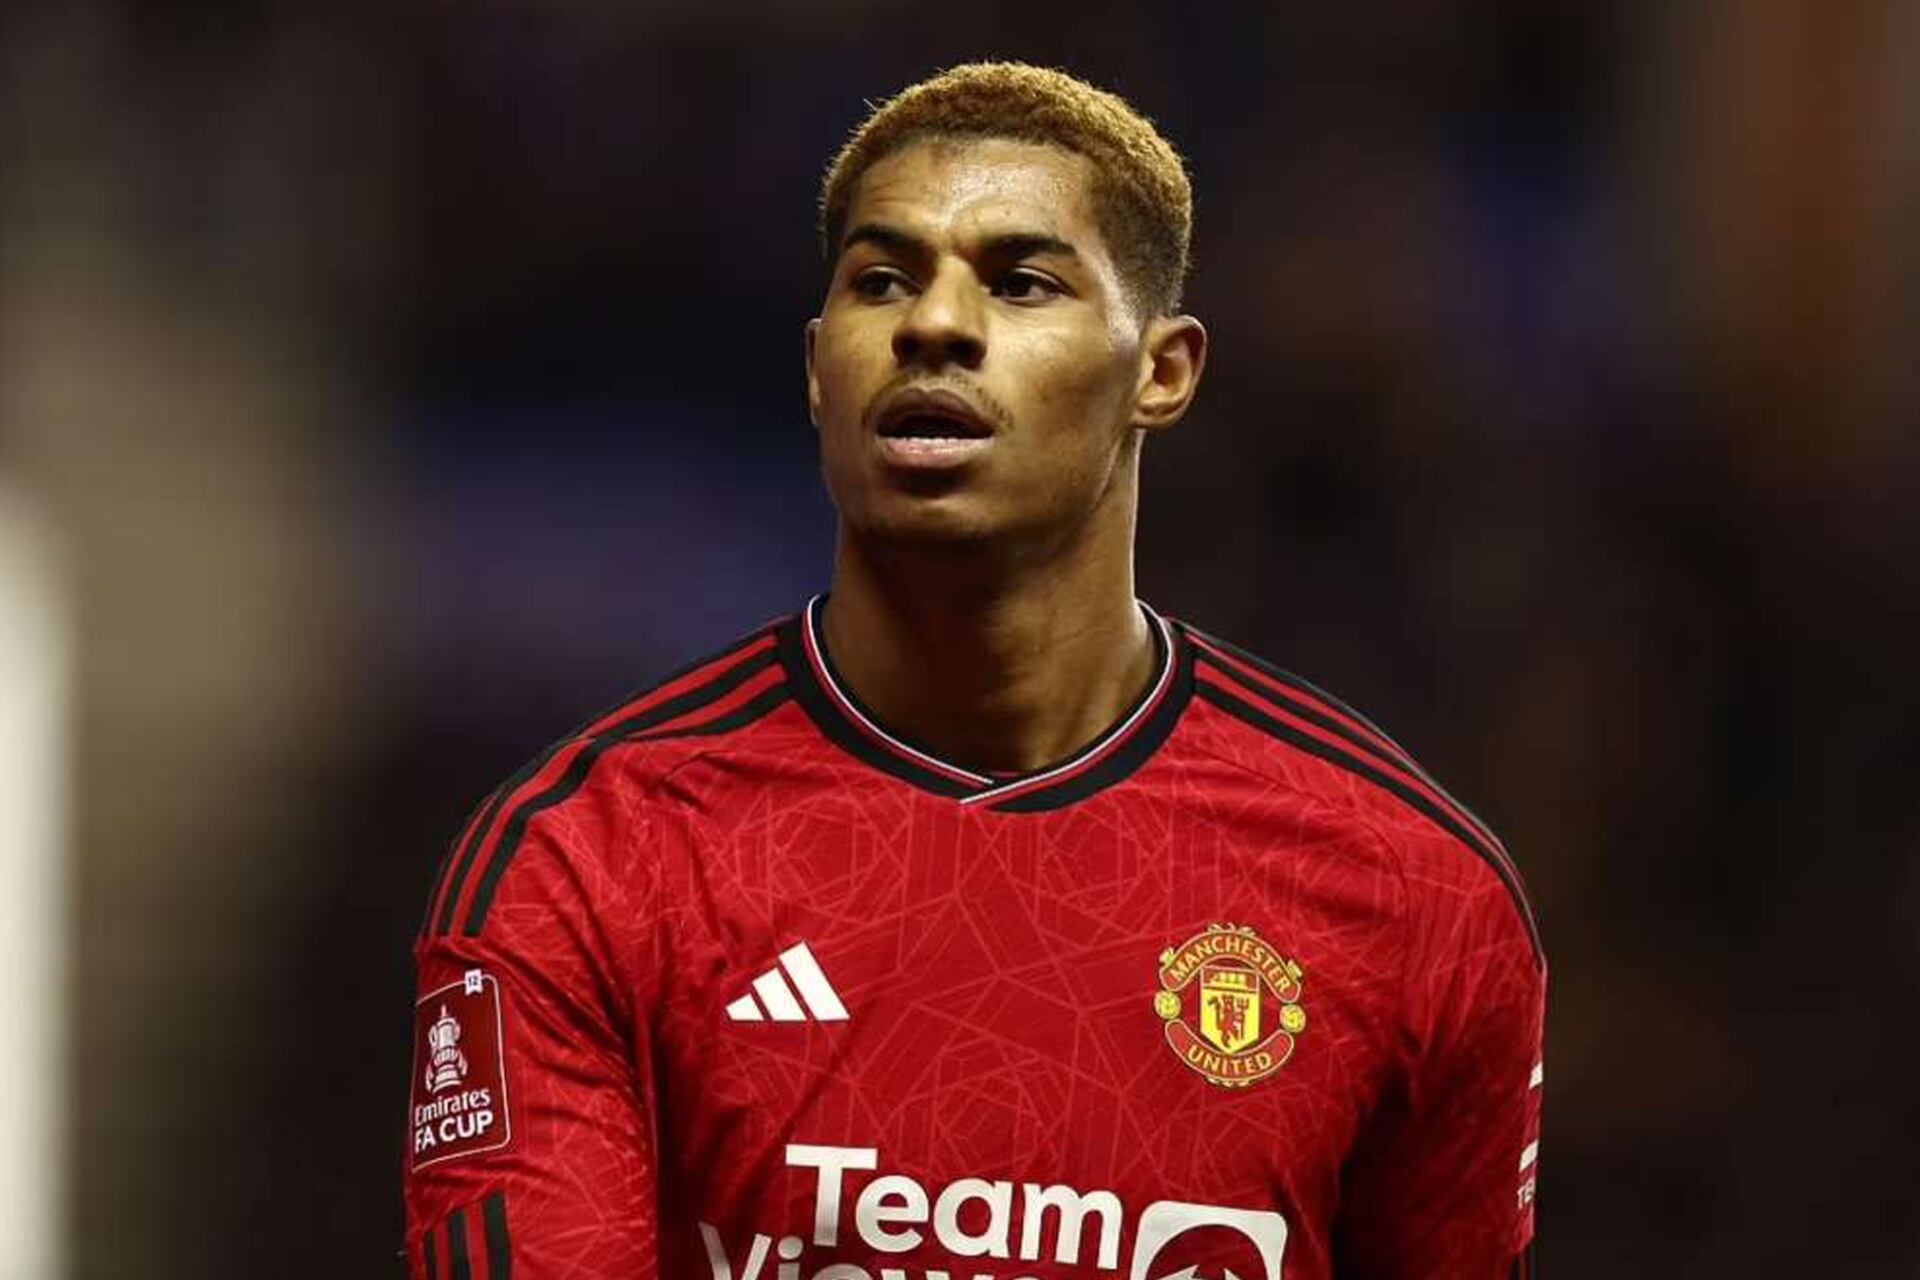 Tired of everyone, Rashford responds to the barrage of criticism he has received